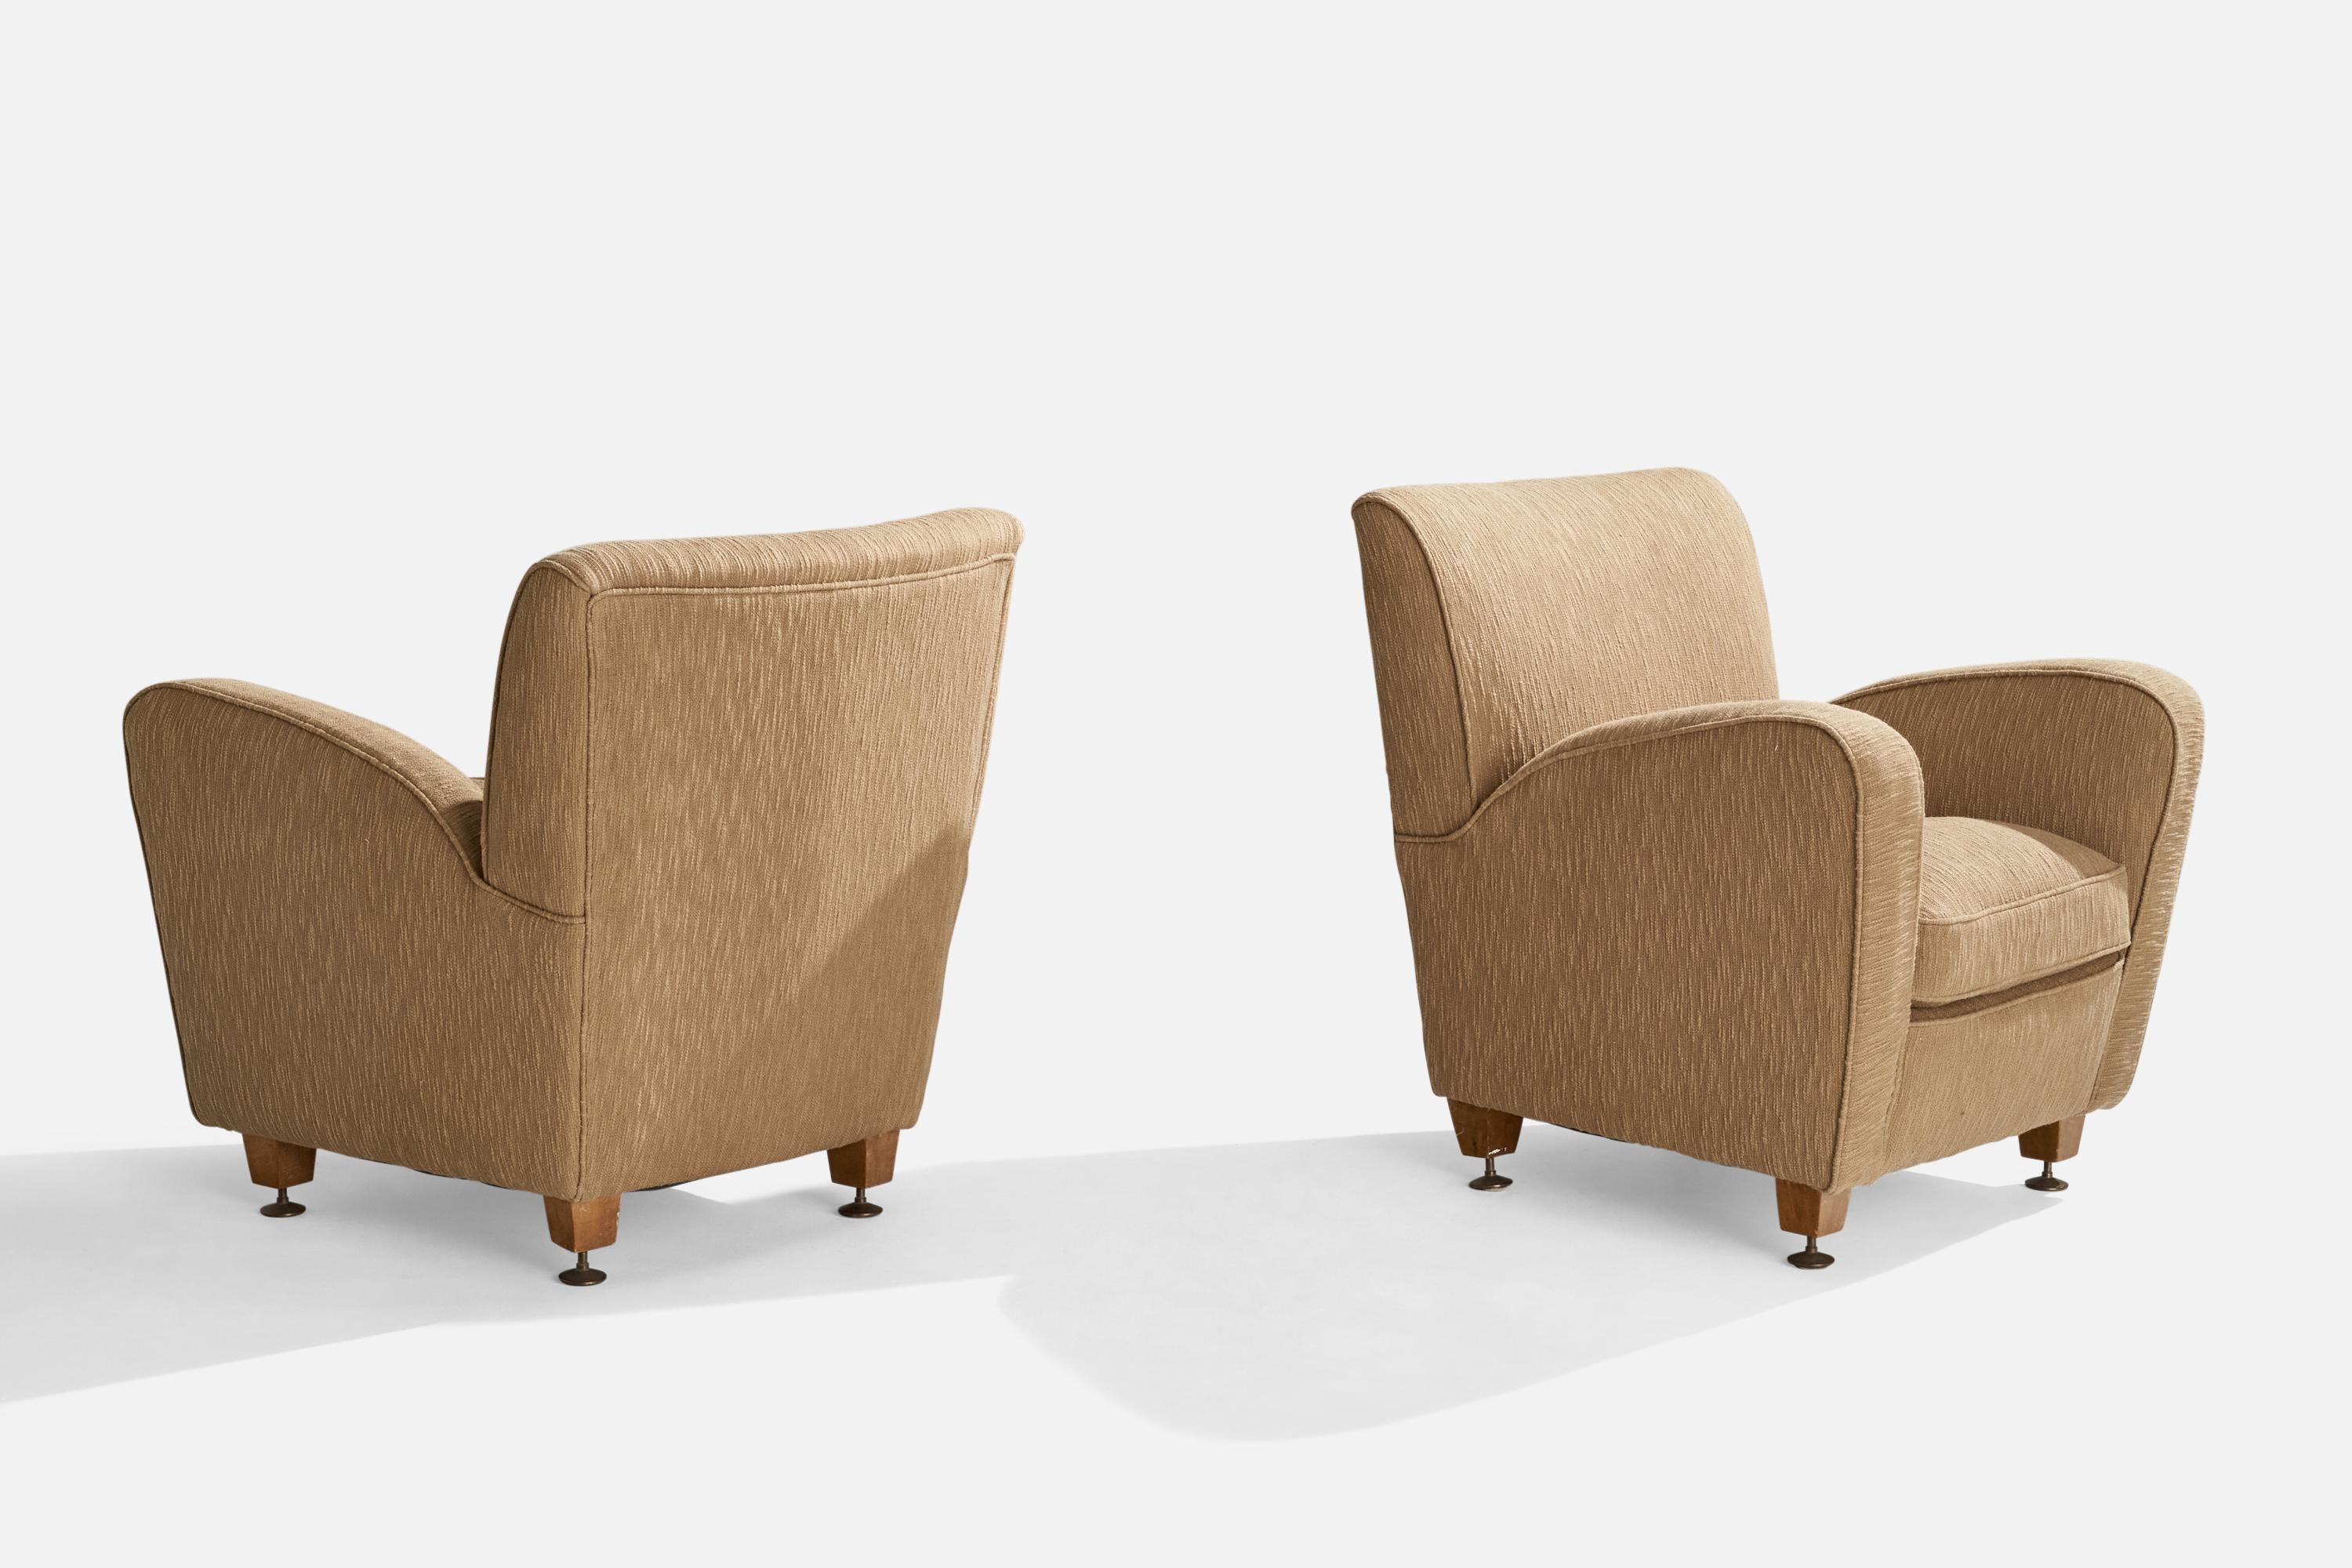 Mid-20th Century Italian Designer, Lounge Chairs, Wood, Fabric, Brass, Italy, 1940s For Sale